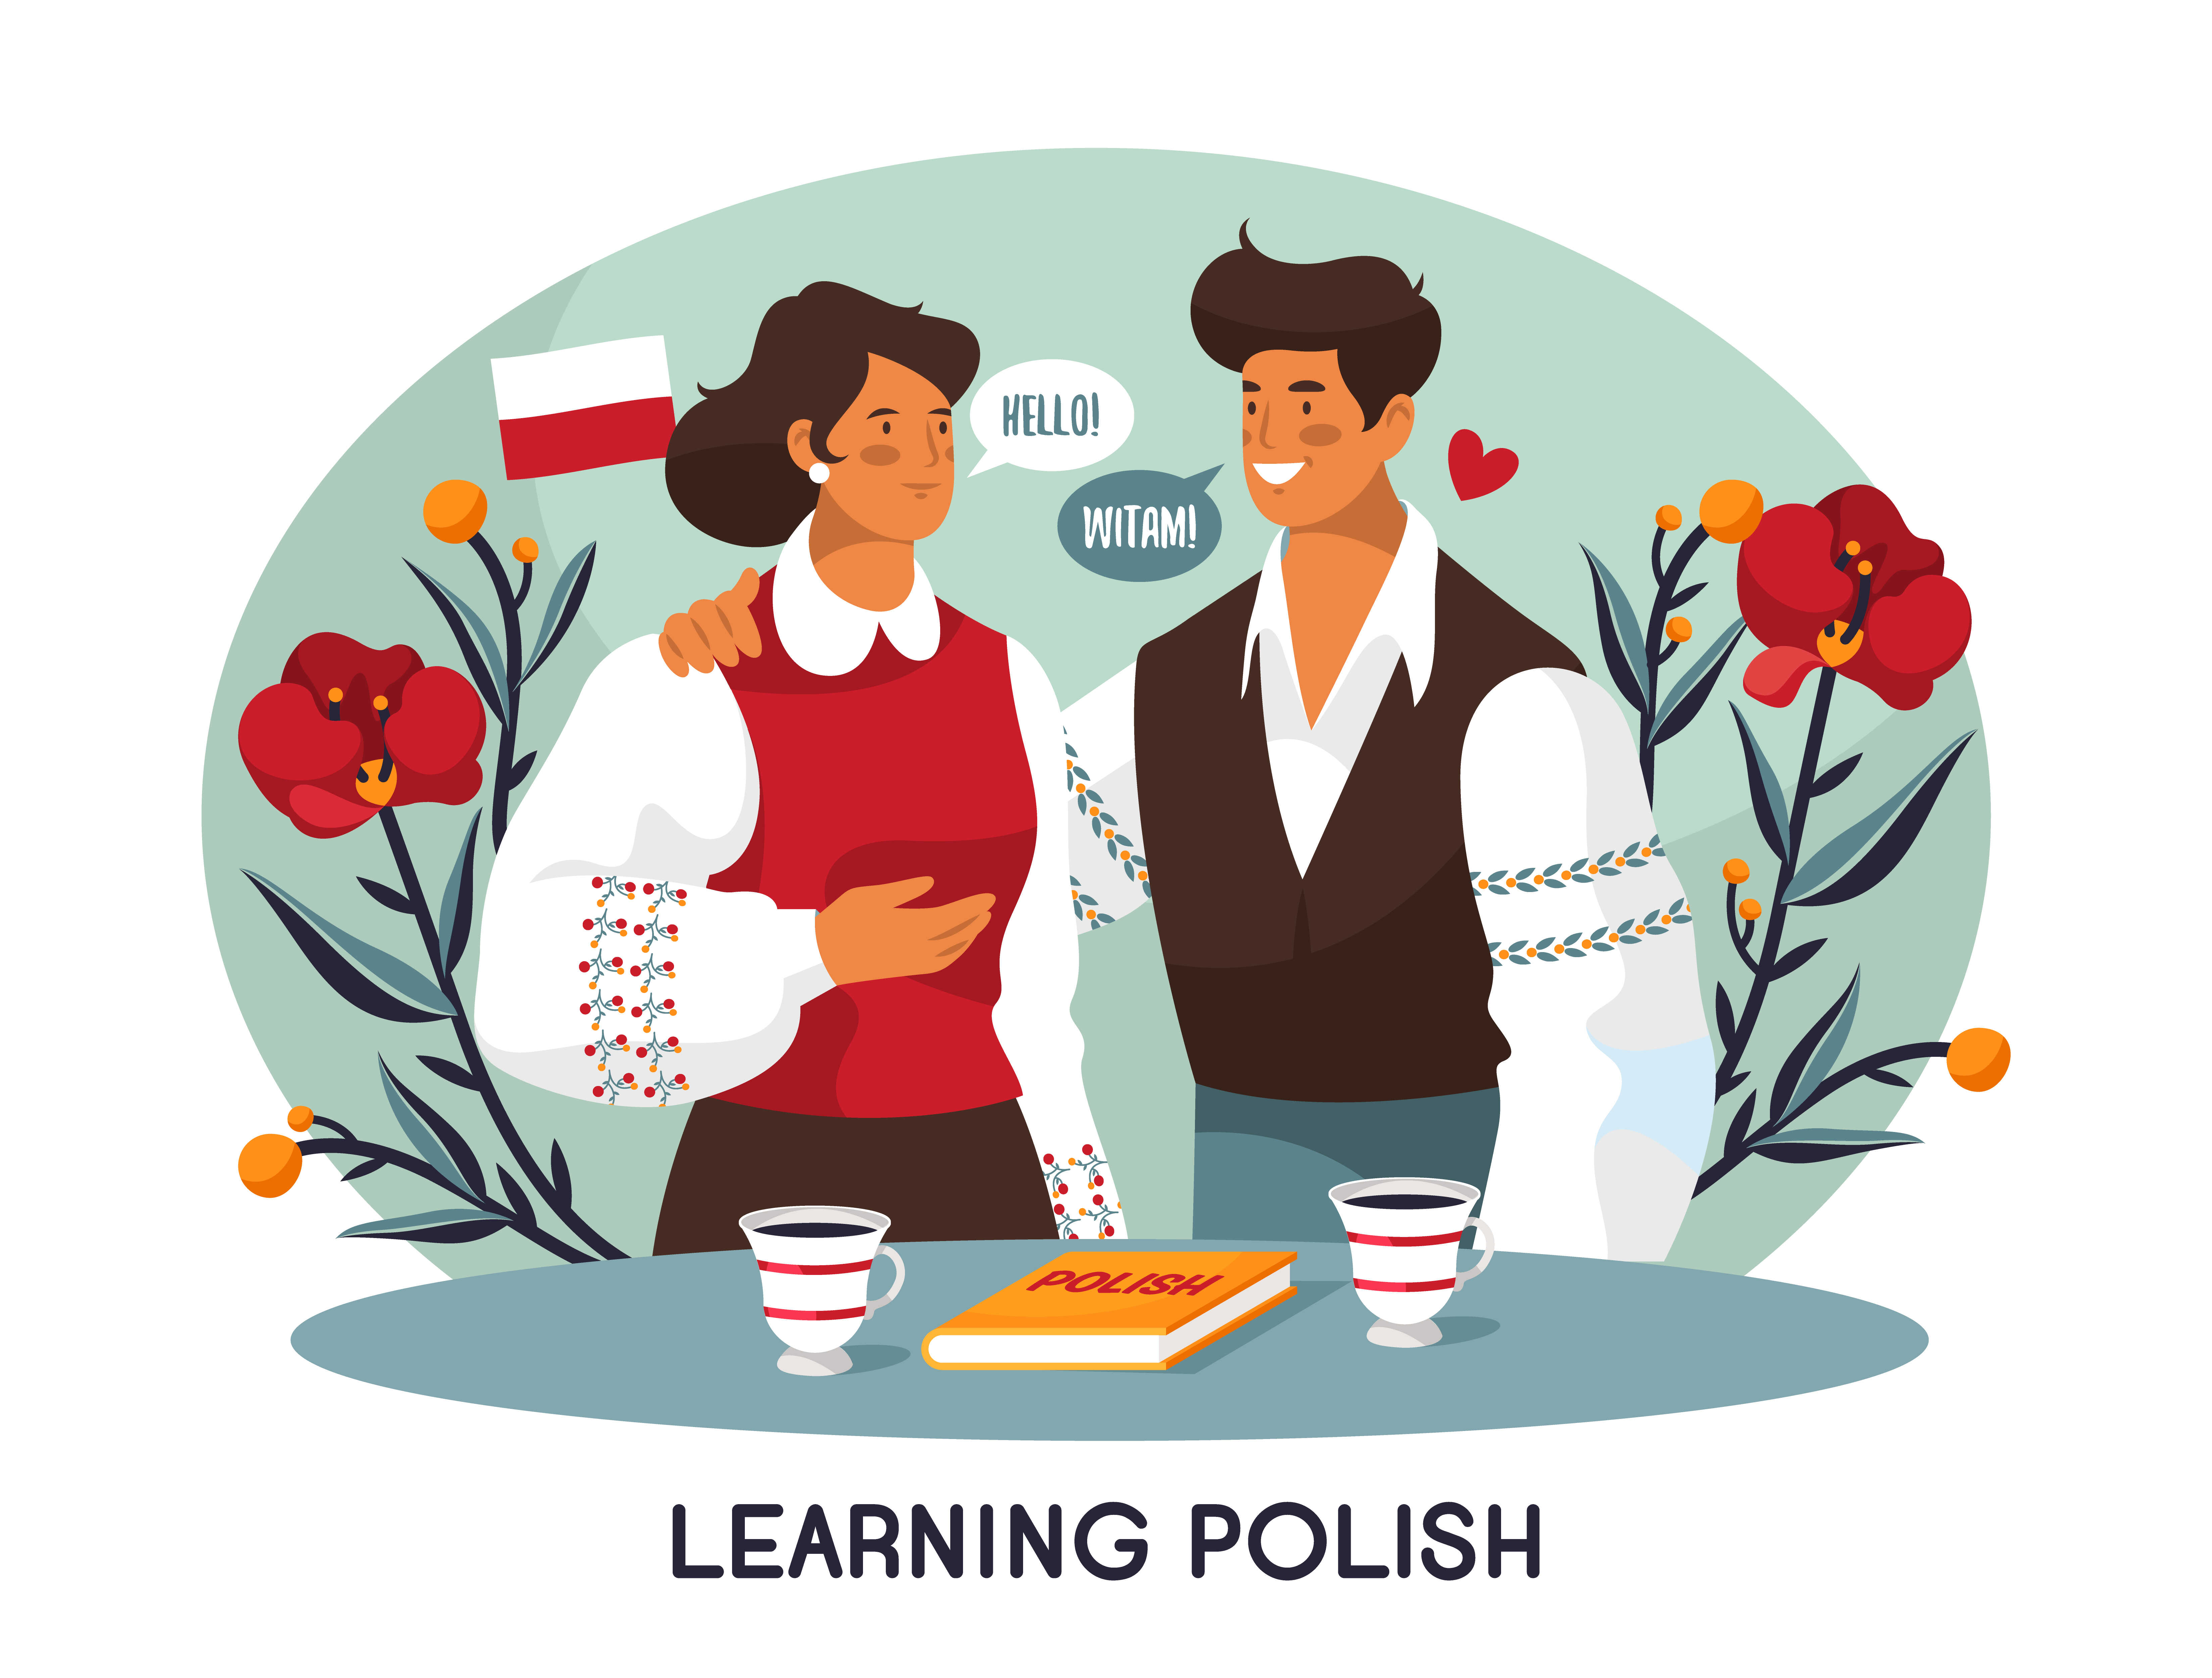 Questions To Find Out How Well You Know Polish Vocabulary